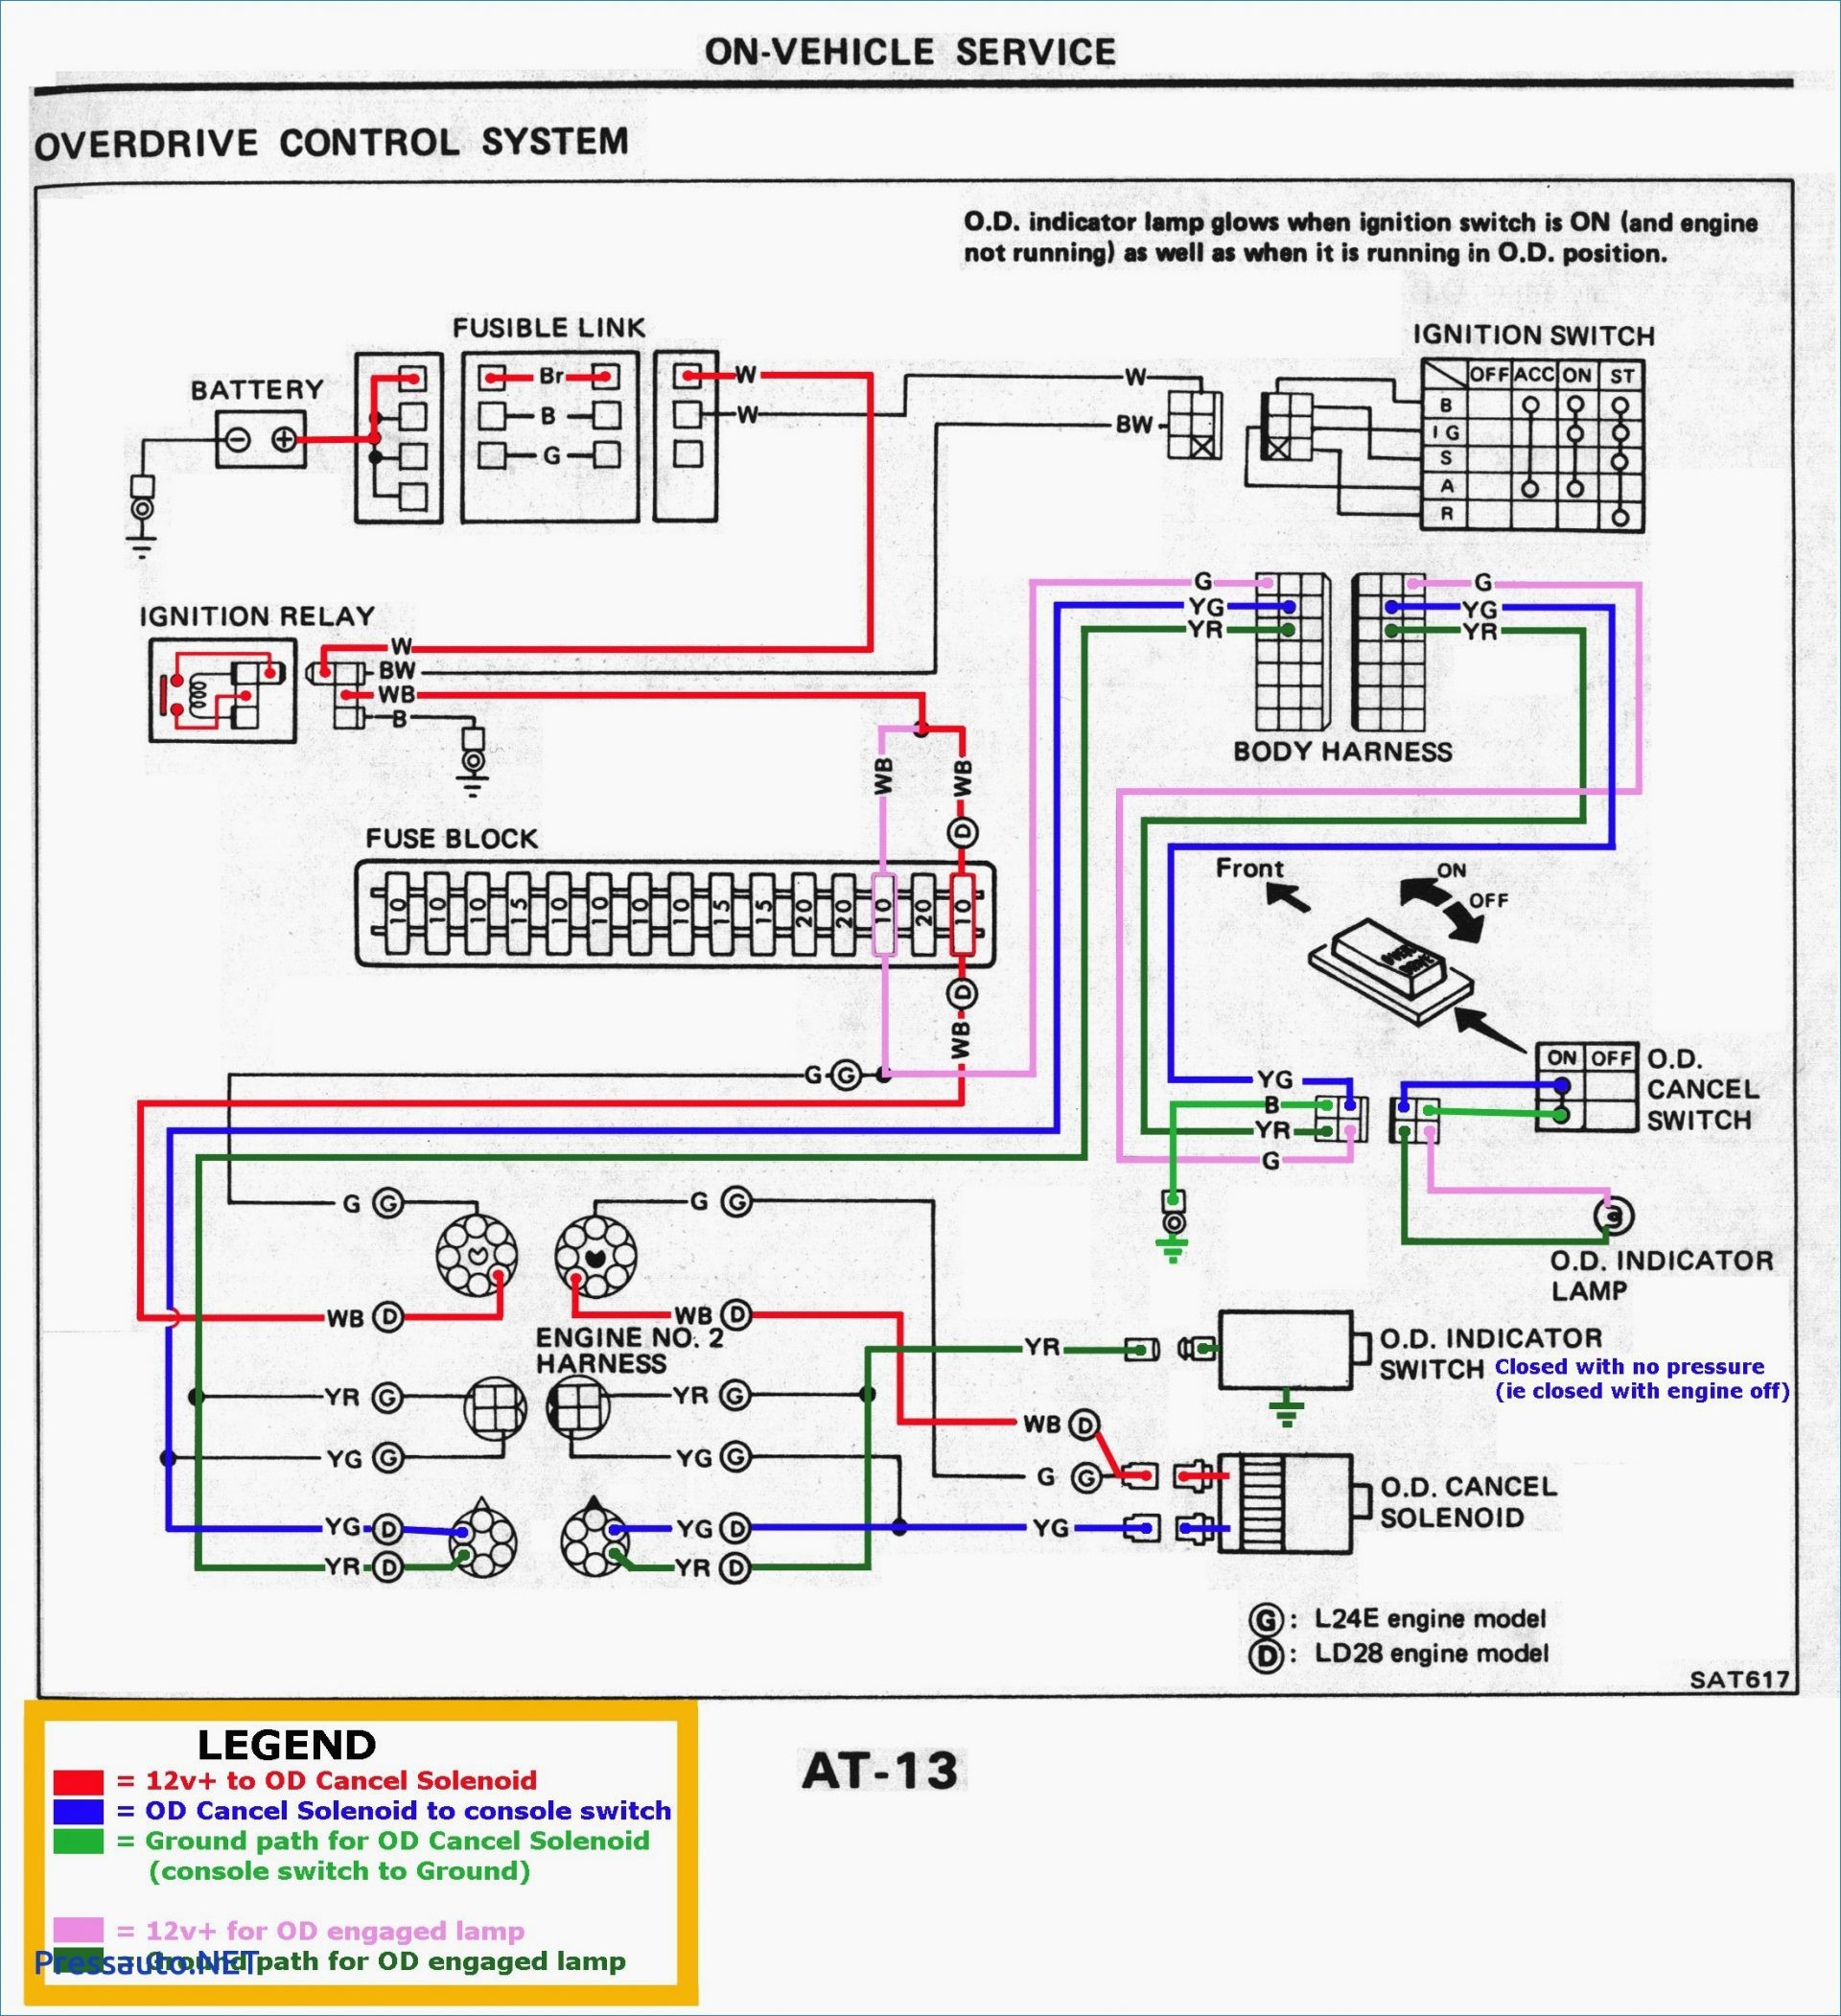 Chevy Tail Light Wiring Diagram Luxury Tail Light Wiring Diagram Chevy Diagram Of Chevy Tail Light Wiring Diagram